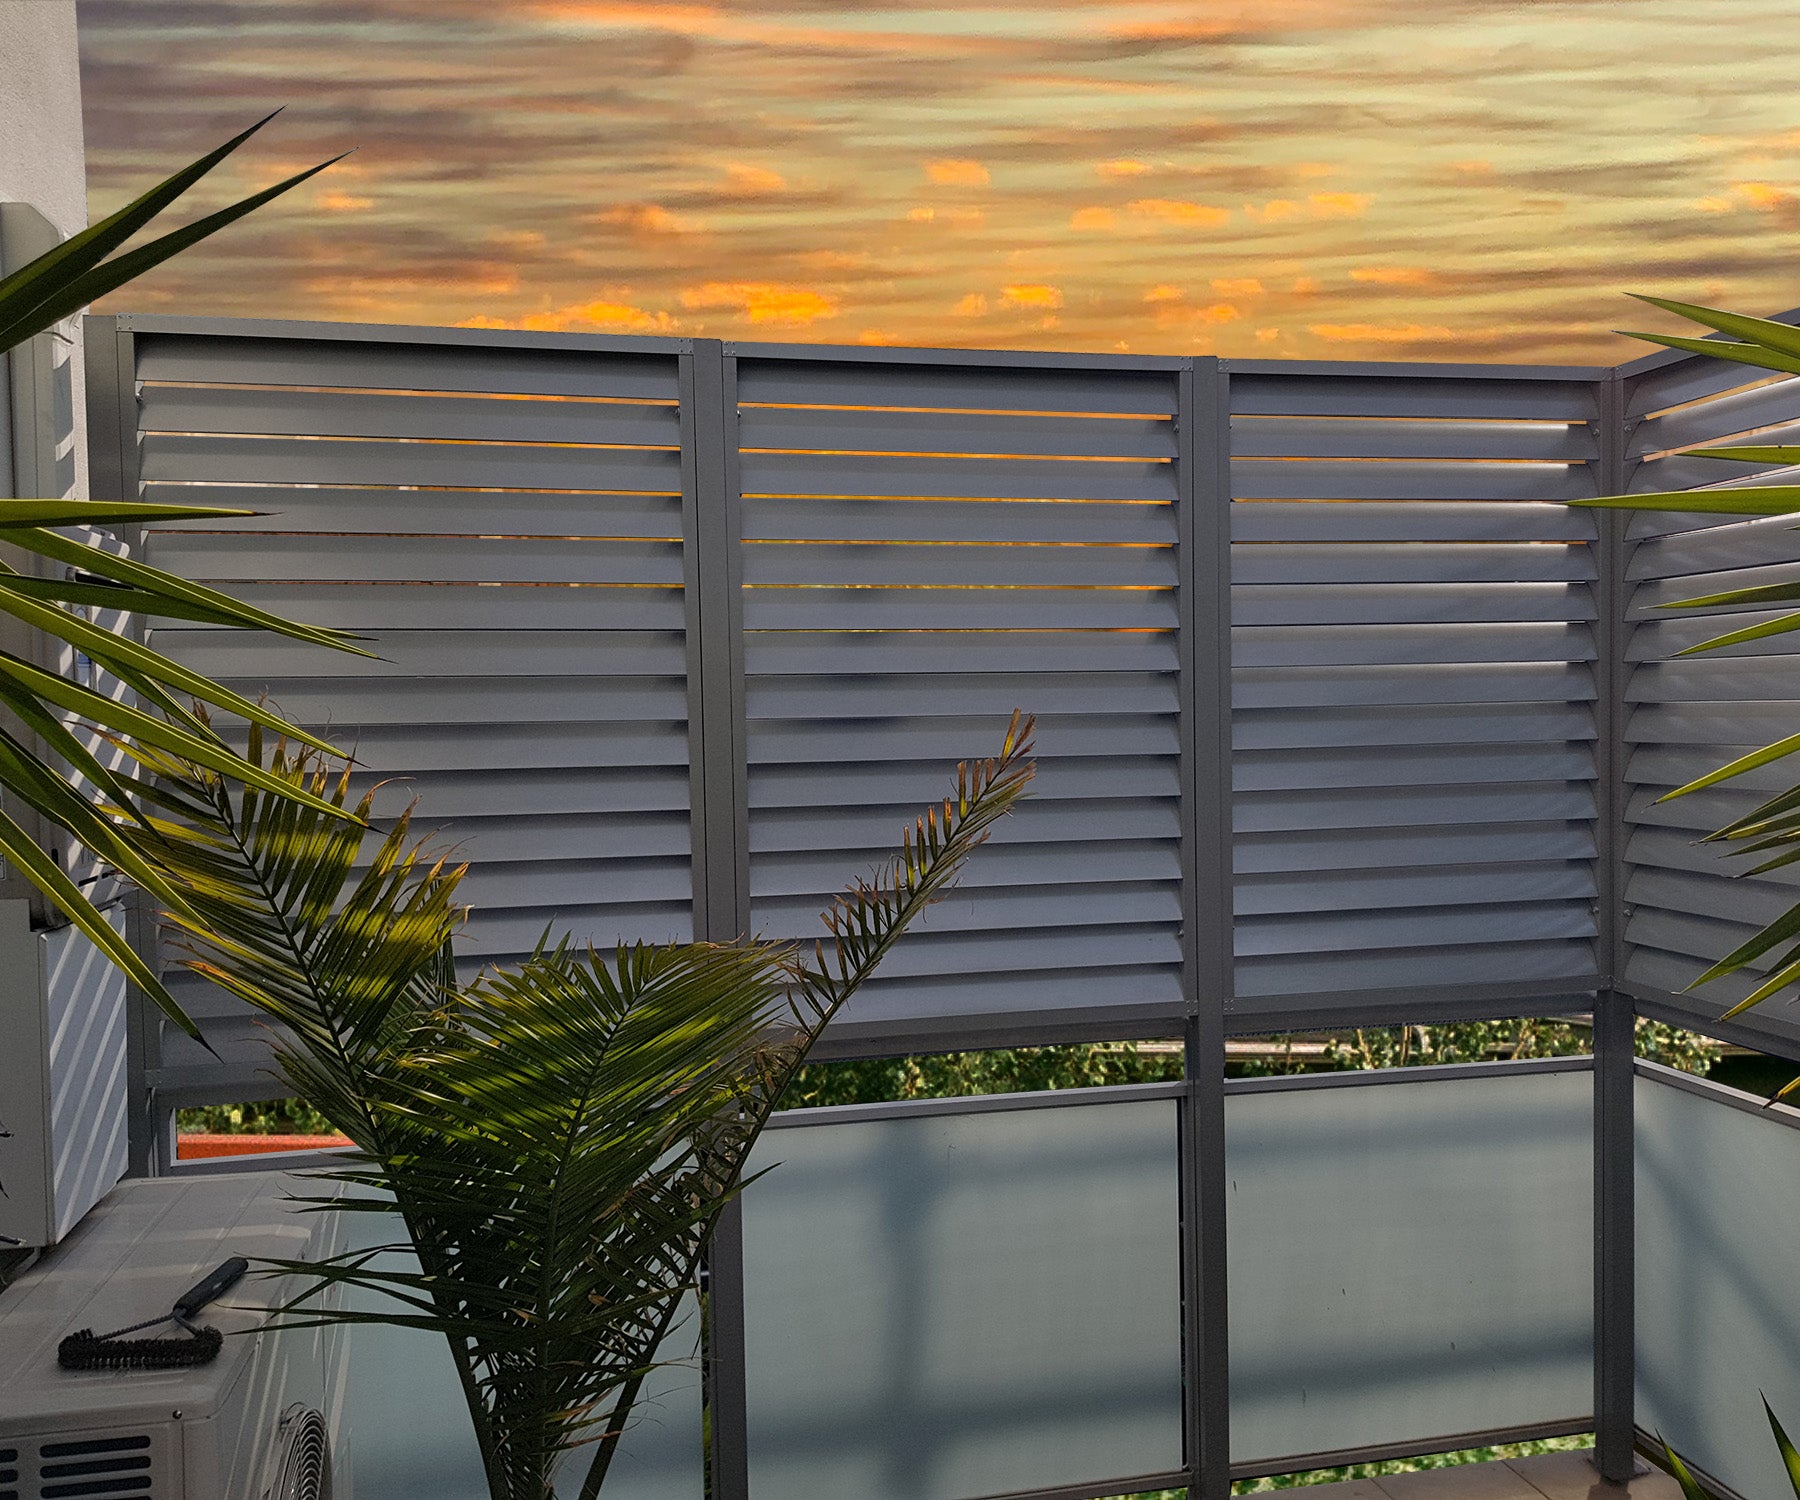 Fixed Eliptical Louvre Balcony Privacy Screen - Sunset